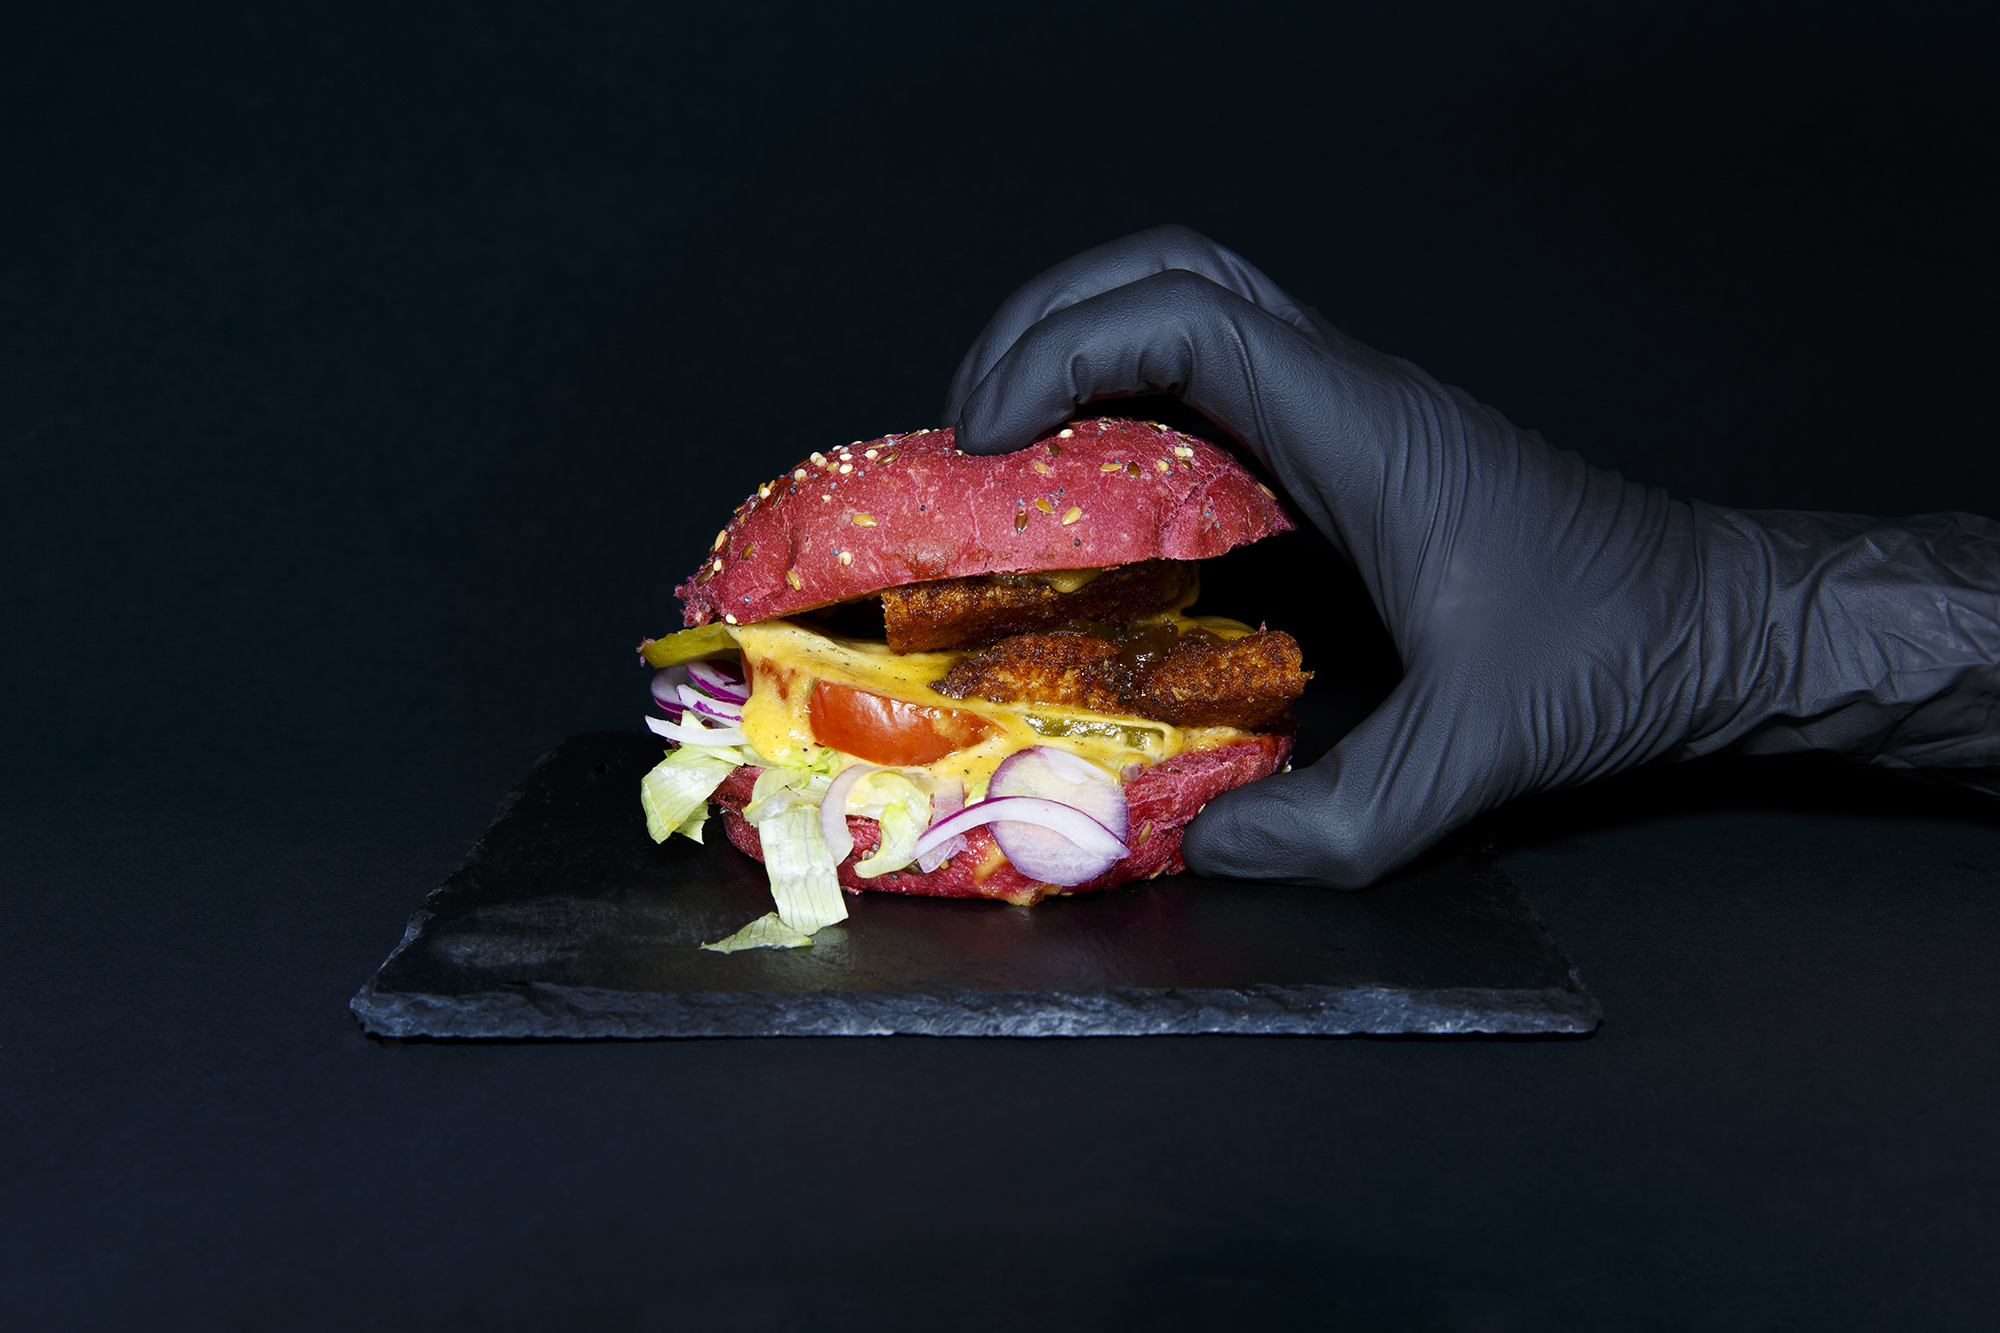 Pink burger with soft bread, breaded chicken, homemade cheddar sauce, candied onions, salad, tomatoes. Served in a slate on a black background. Hand of a woman holding a fork in the plate.